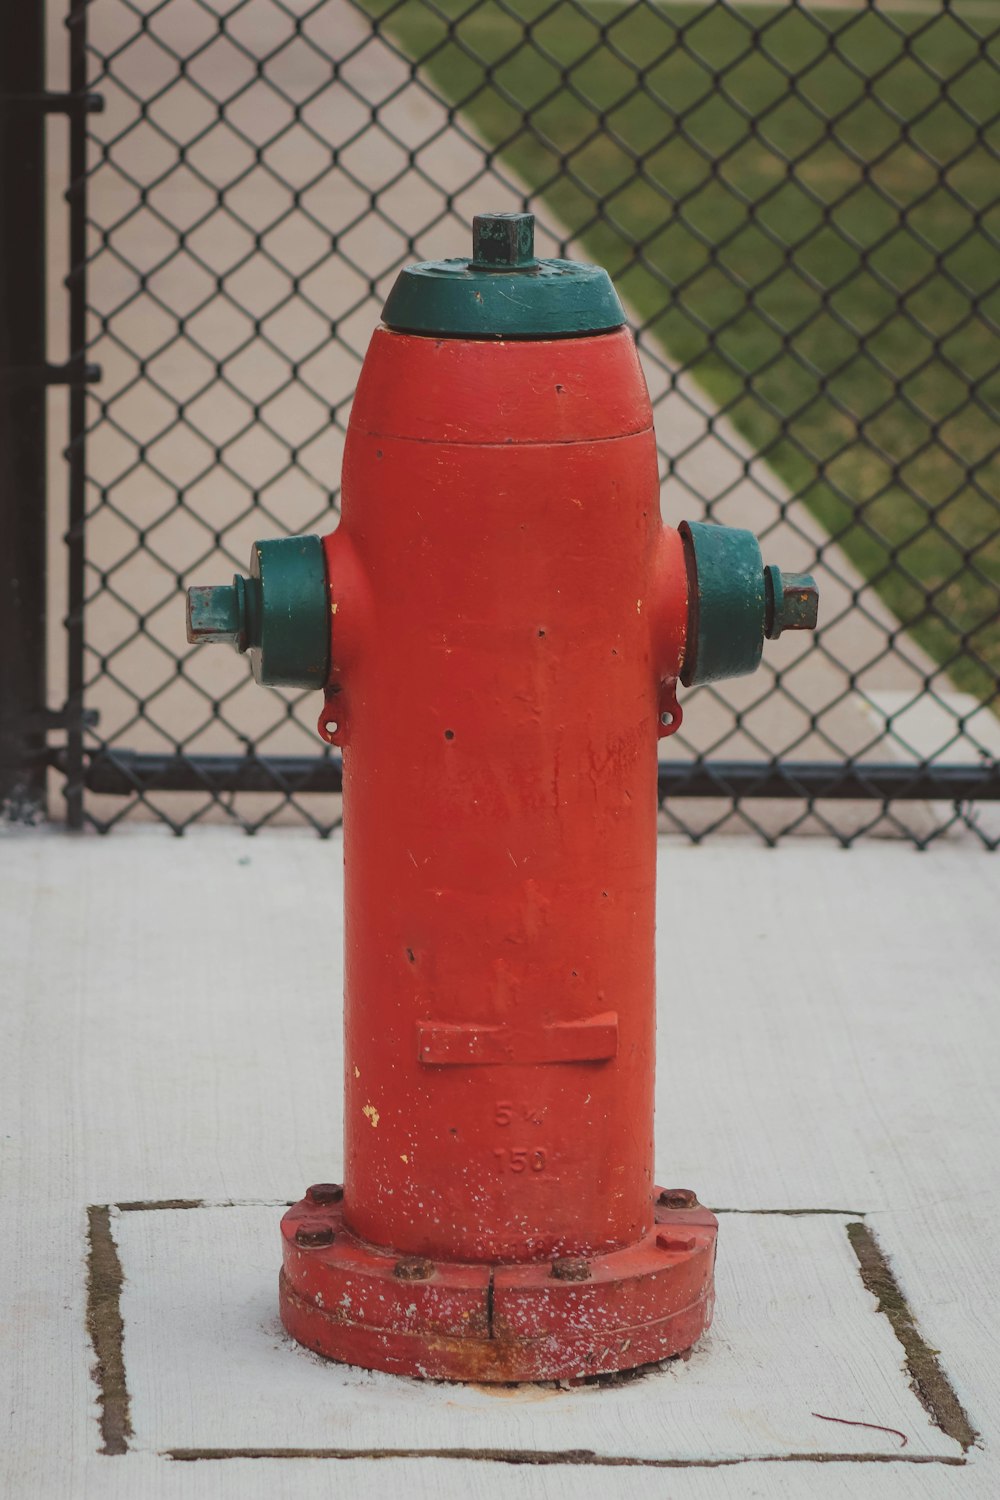 a red and green fire hydrant sitting on a sidewalk